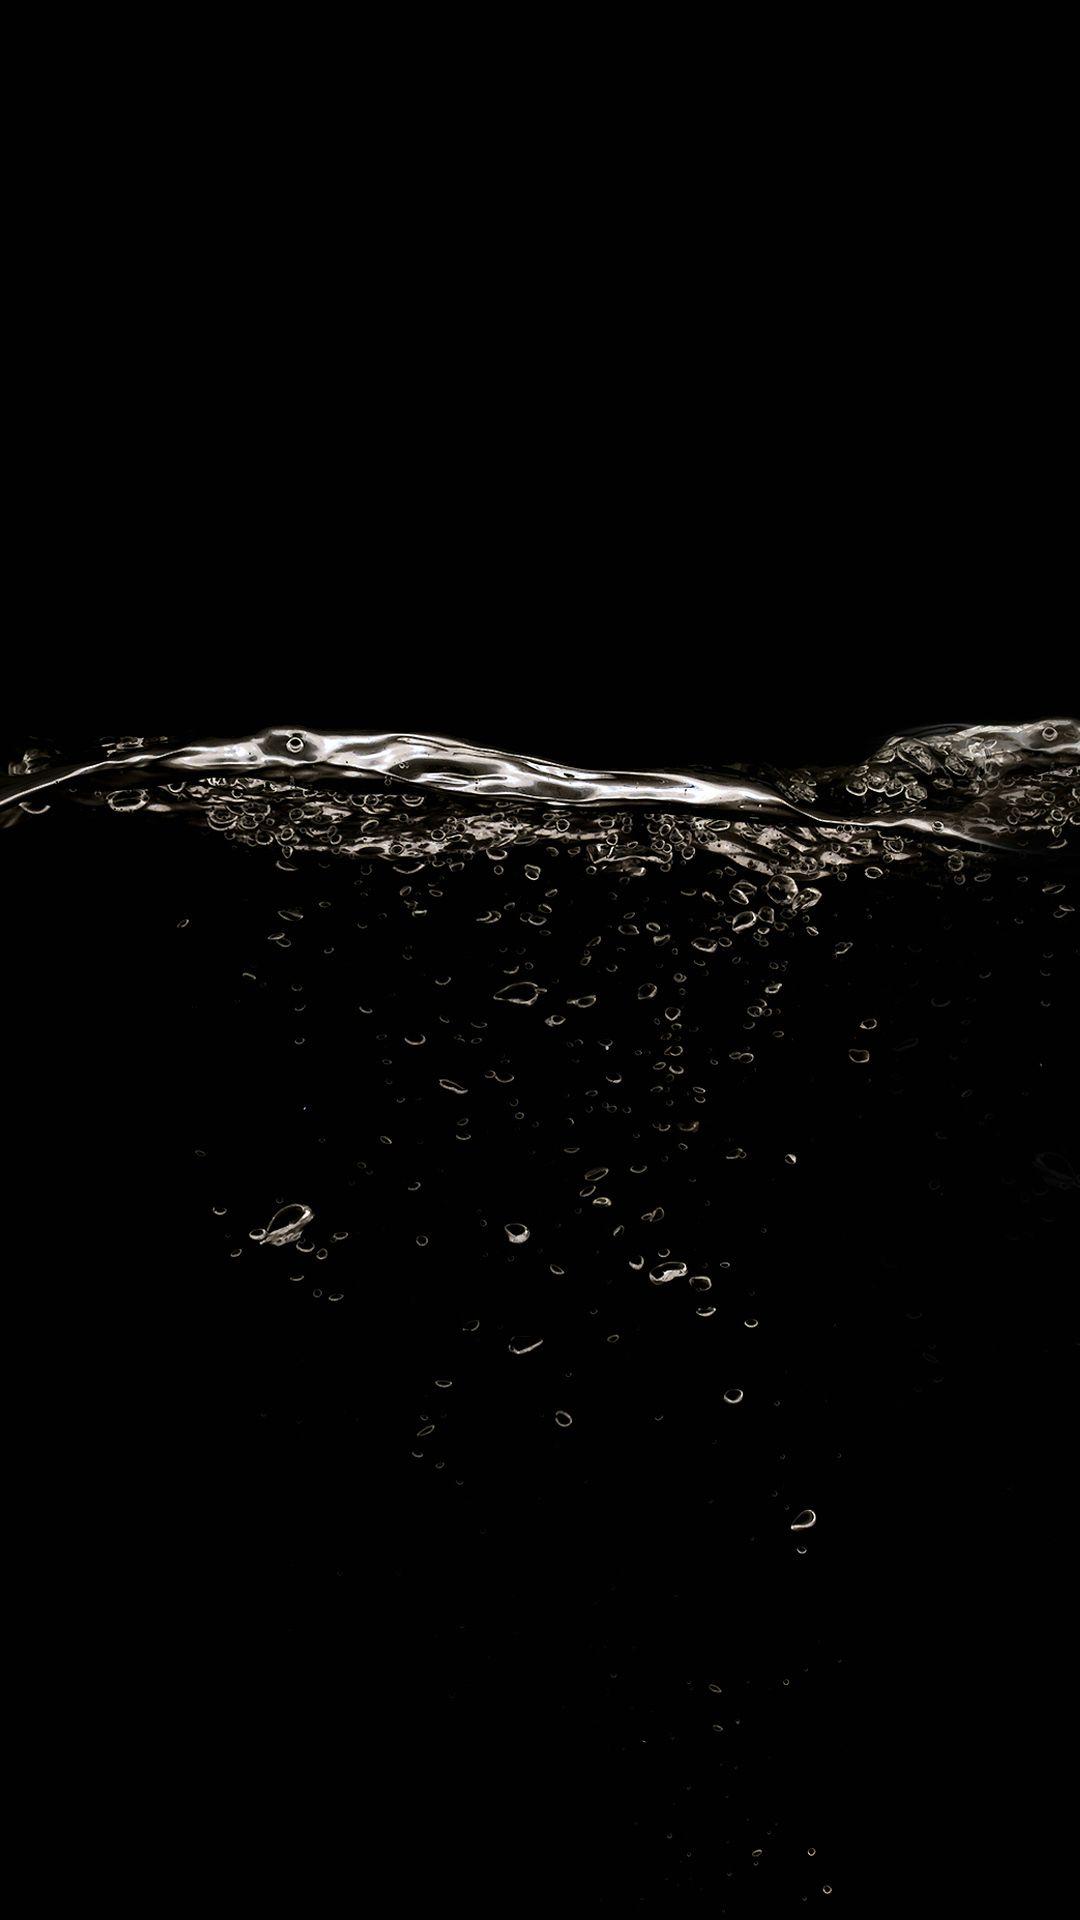 Black Abstract Water Division Android Wallpaper free download